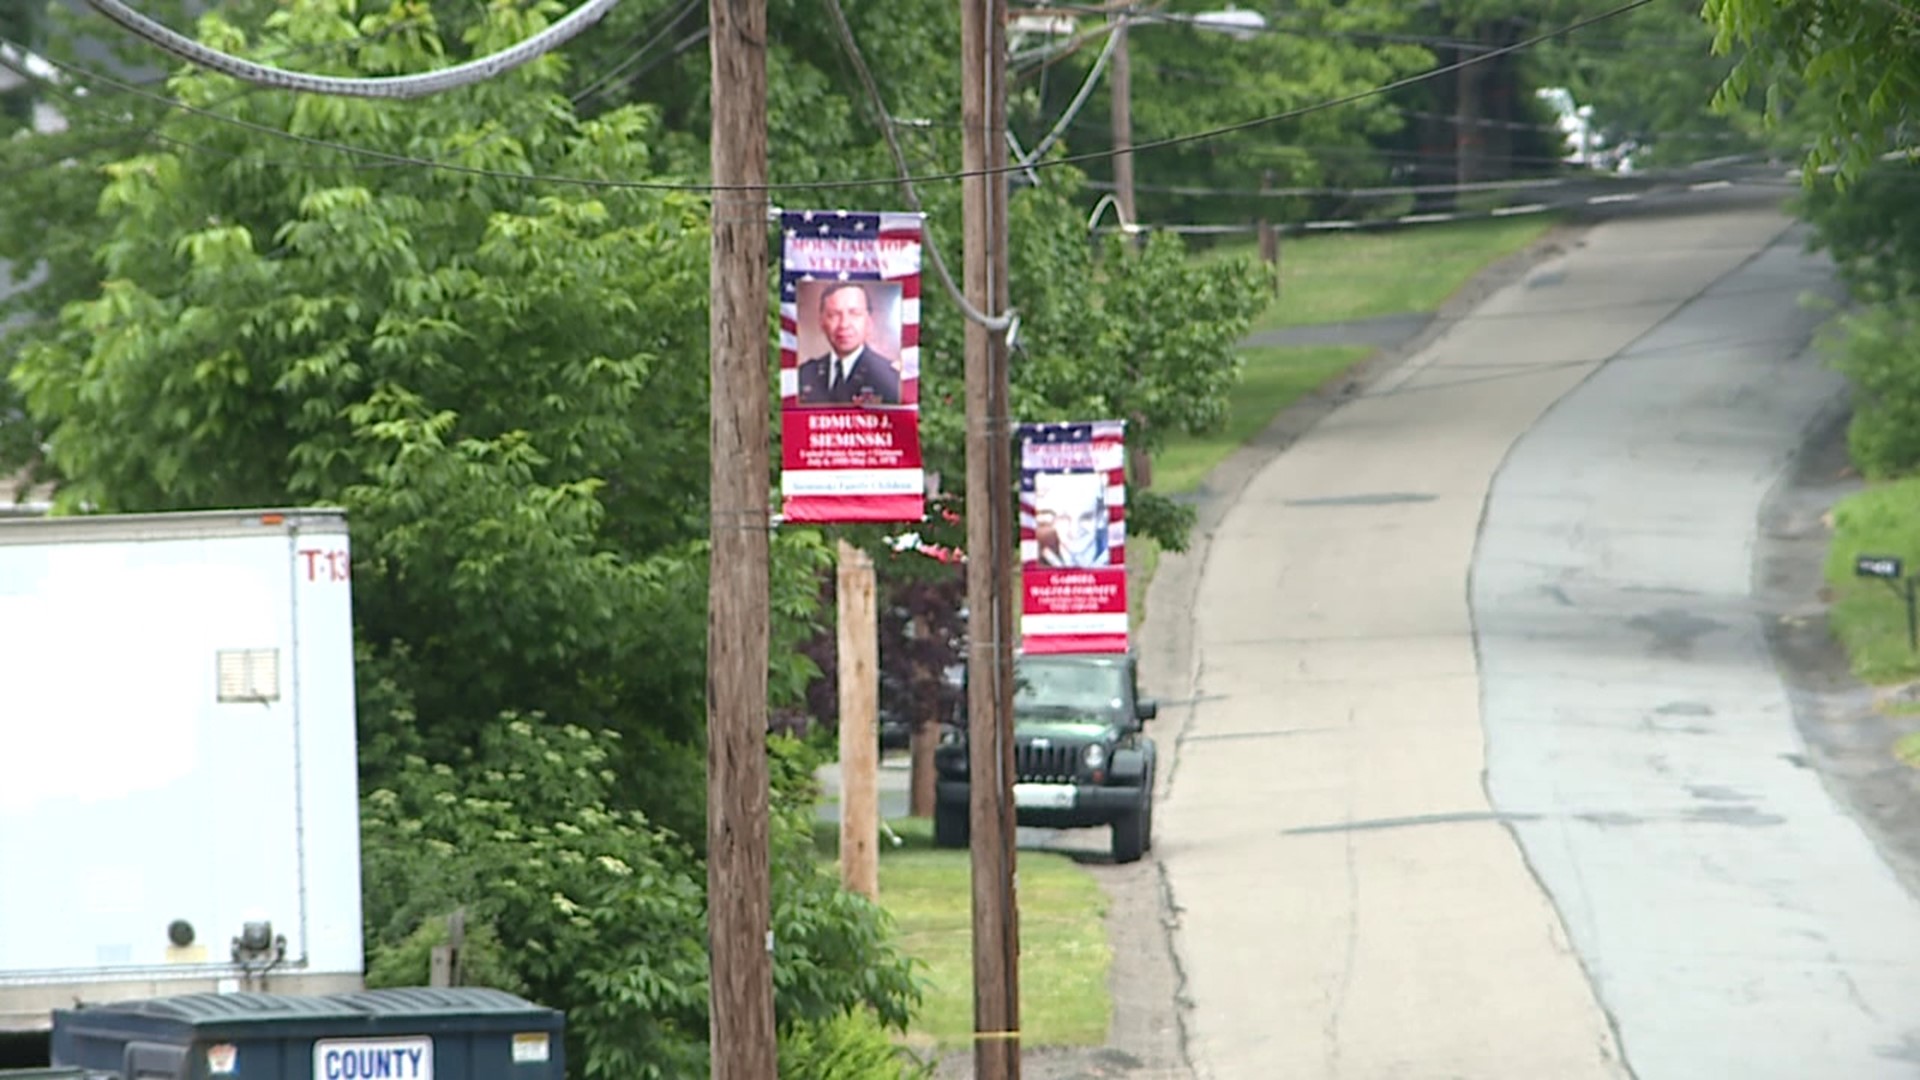 The Hometown Heroes program began hanging banners on Sunday recognizing veterans from Mountain Top.